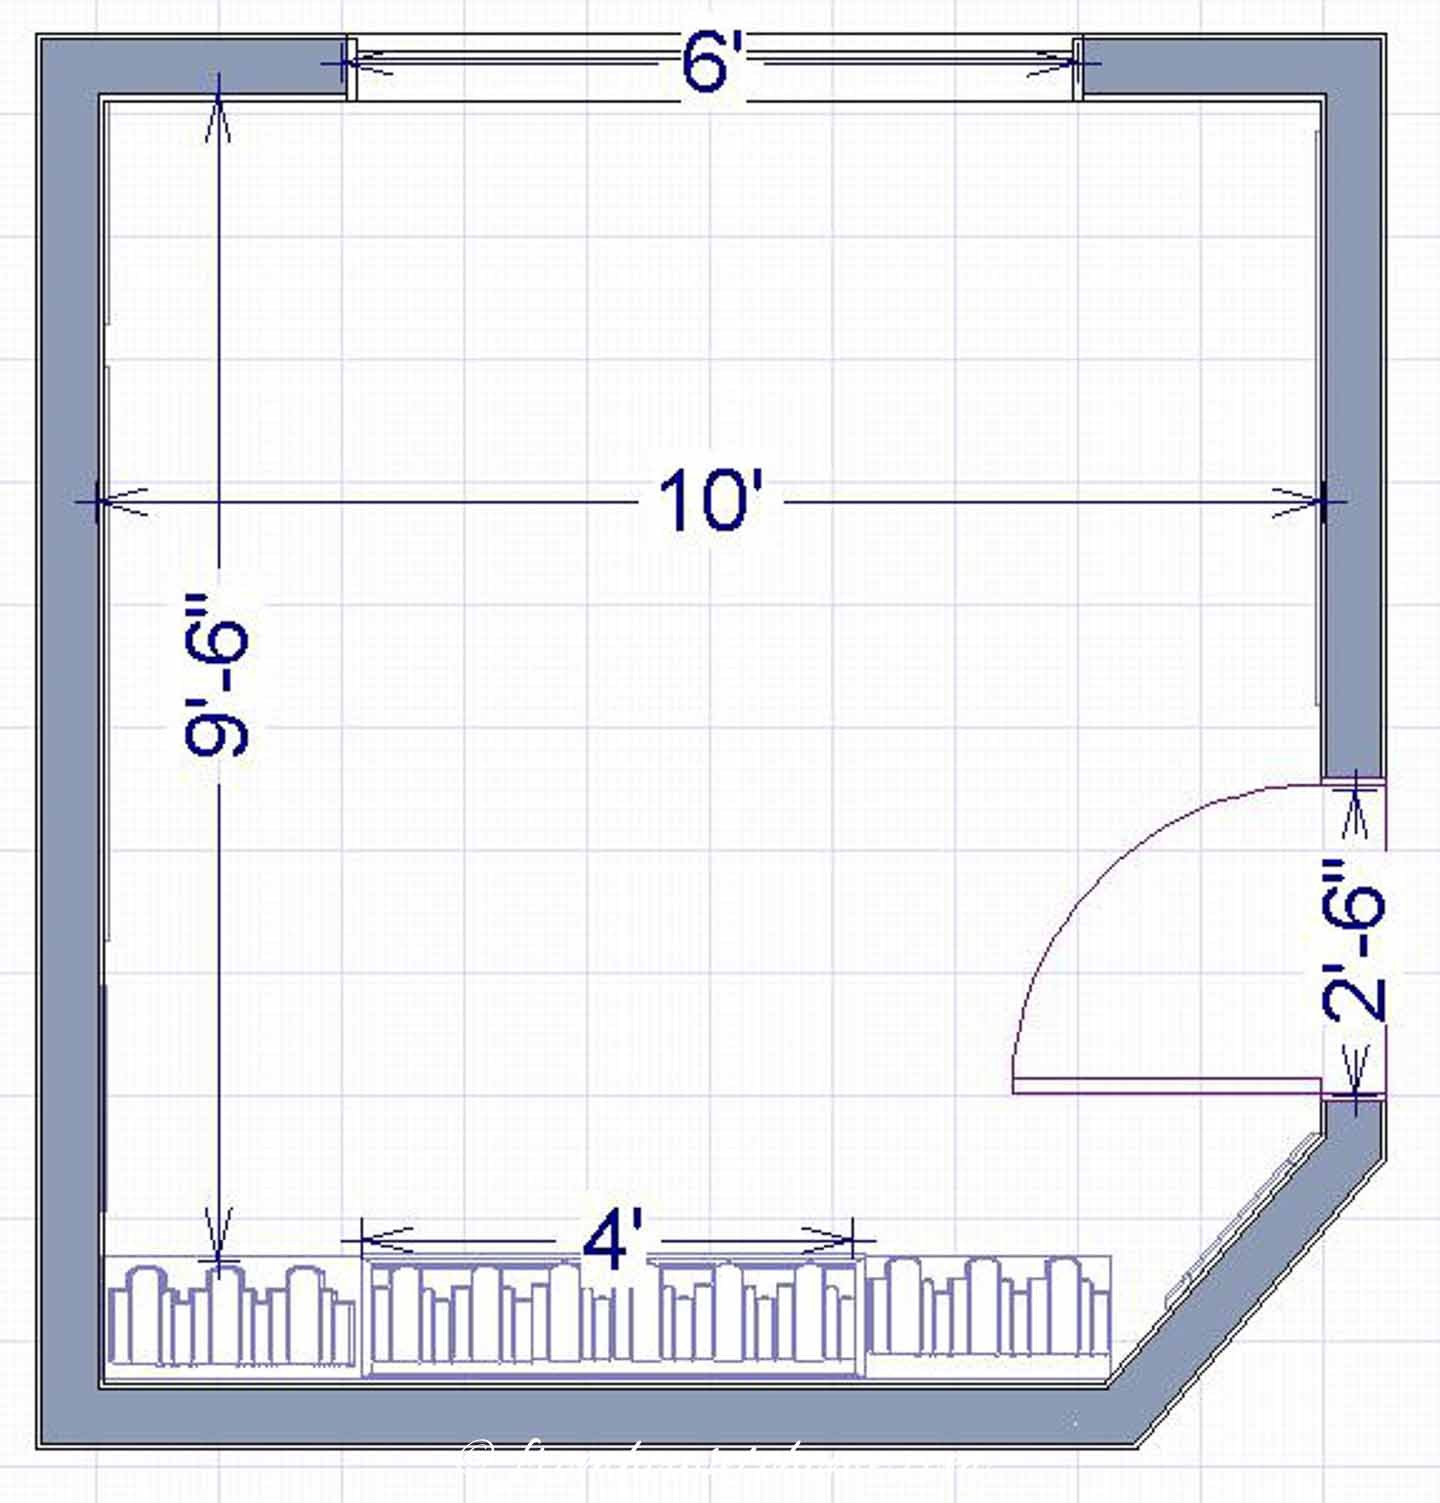 Scale drawing of a 10' x 10' home office layout with a large window and no furniture